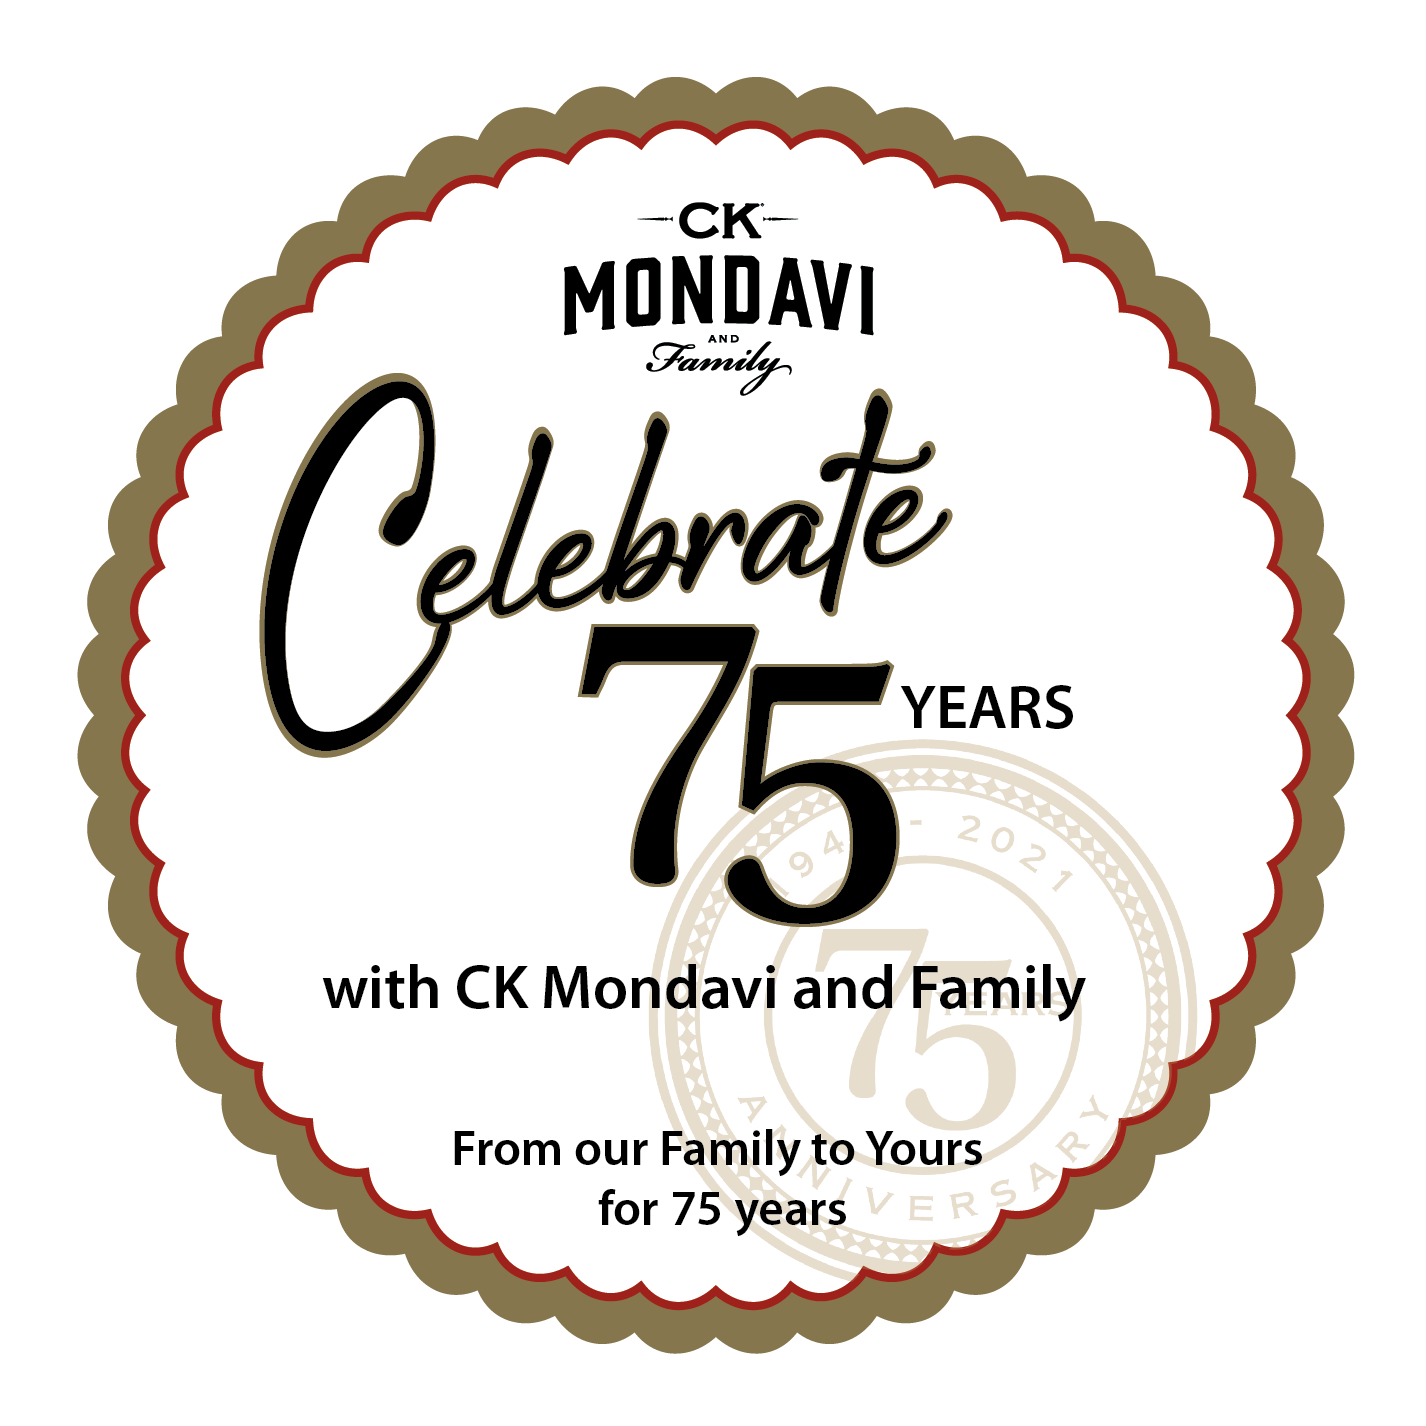 As CK Mondavi and Family wraps up a milestone year marking its 75th anniversary, the winery is sharing the celebratory spirit by offering fans the chance to win a sparkling gift in its Diamond Sweepstakes, which runs September through the end of the year. Seven grand prize winners will receive gift certificates of $1,000 for use at a fine jewelry retailer. Five first place prize winners will receive one CK Mondavi and Family travel jewelry case.